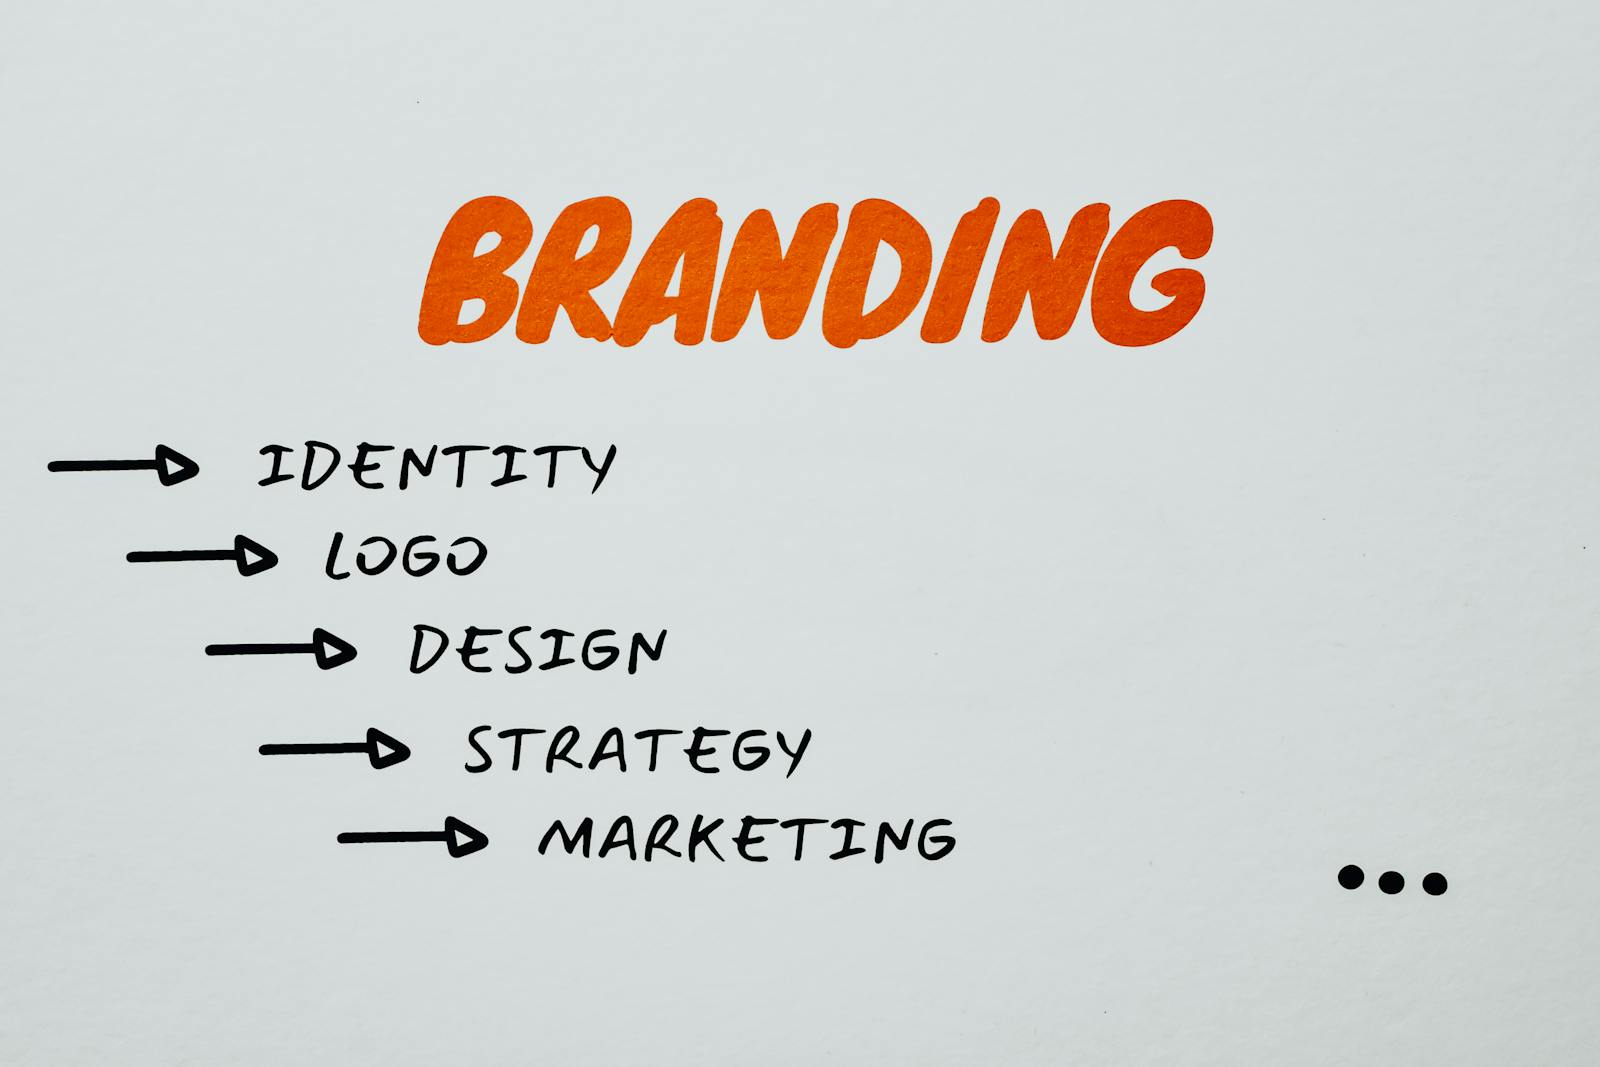 How to Create a Brand Style Guide